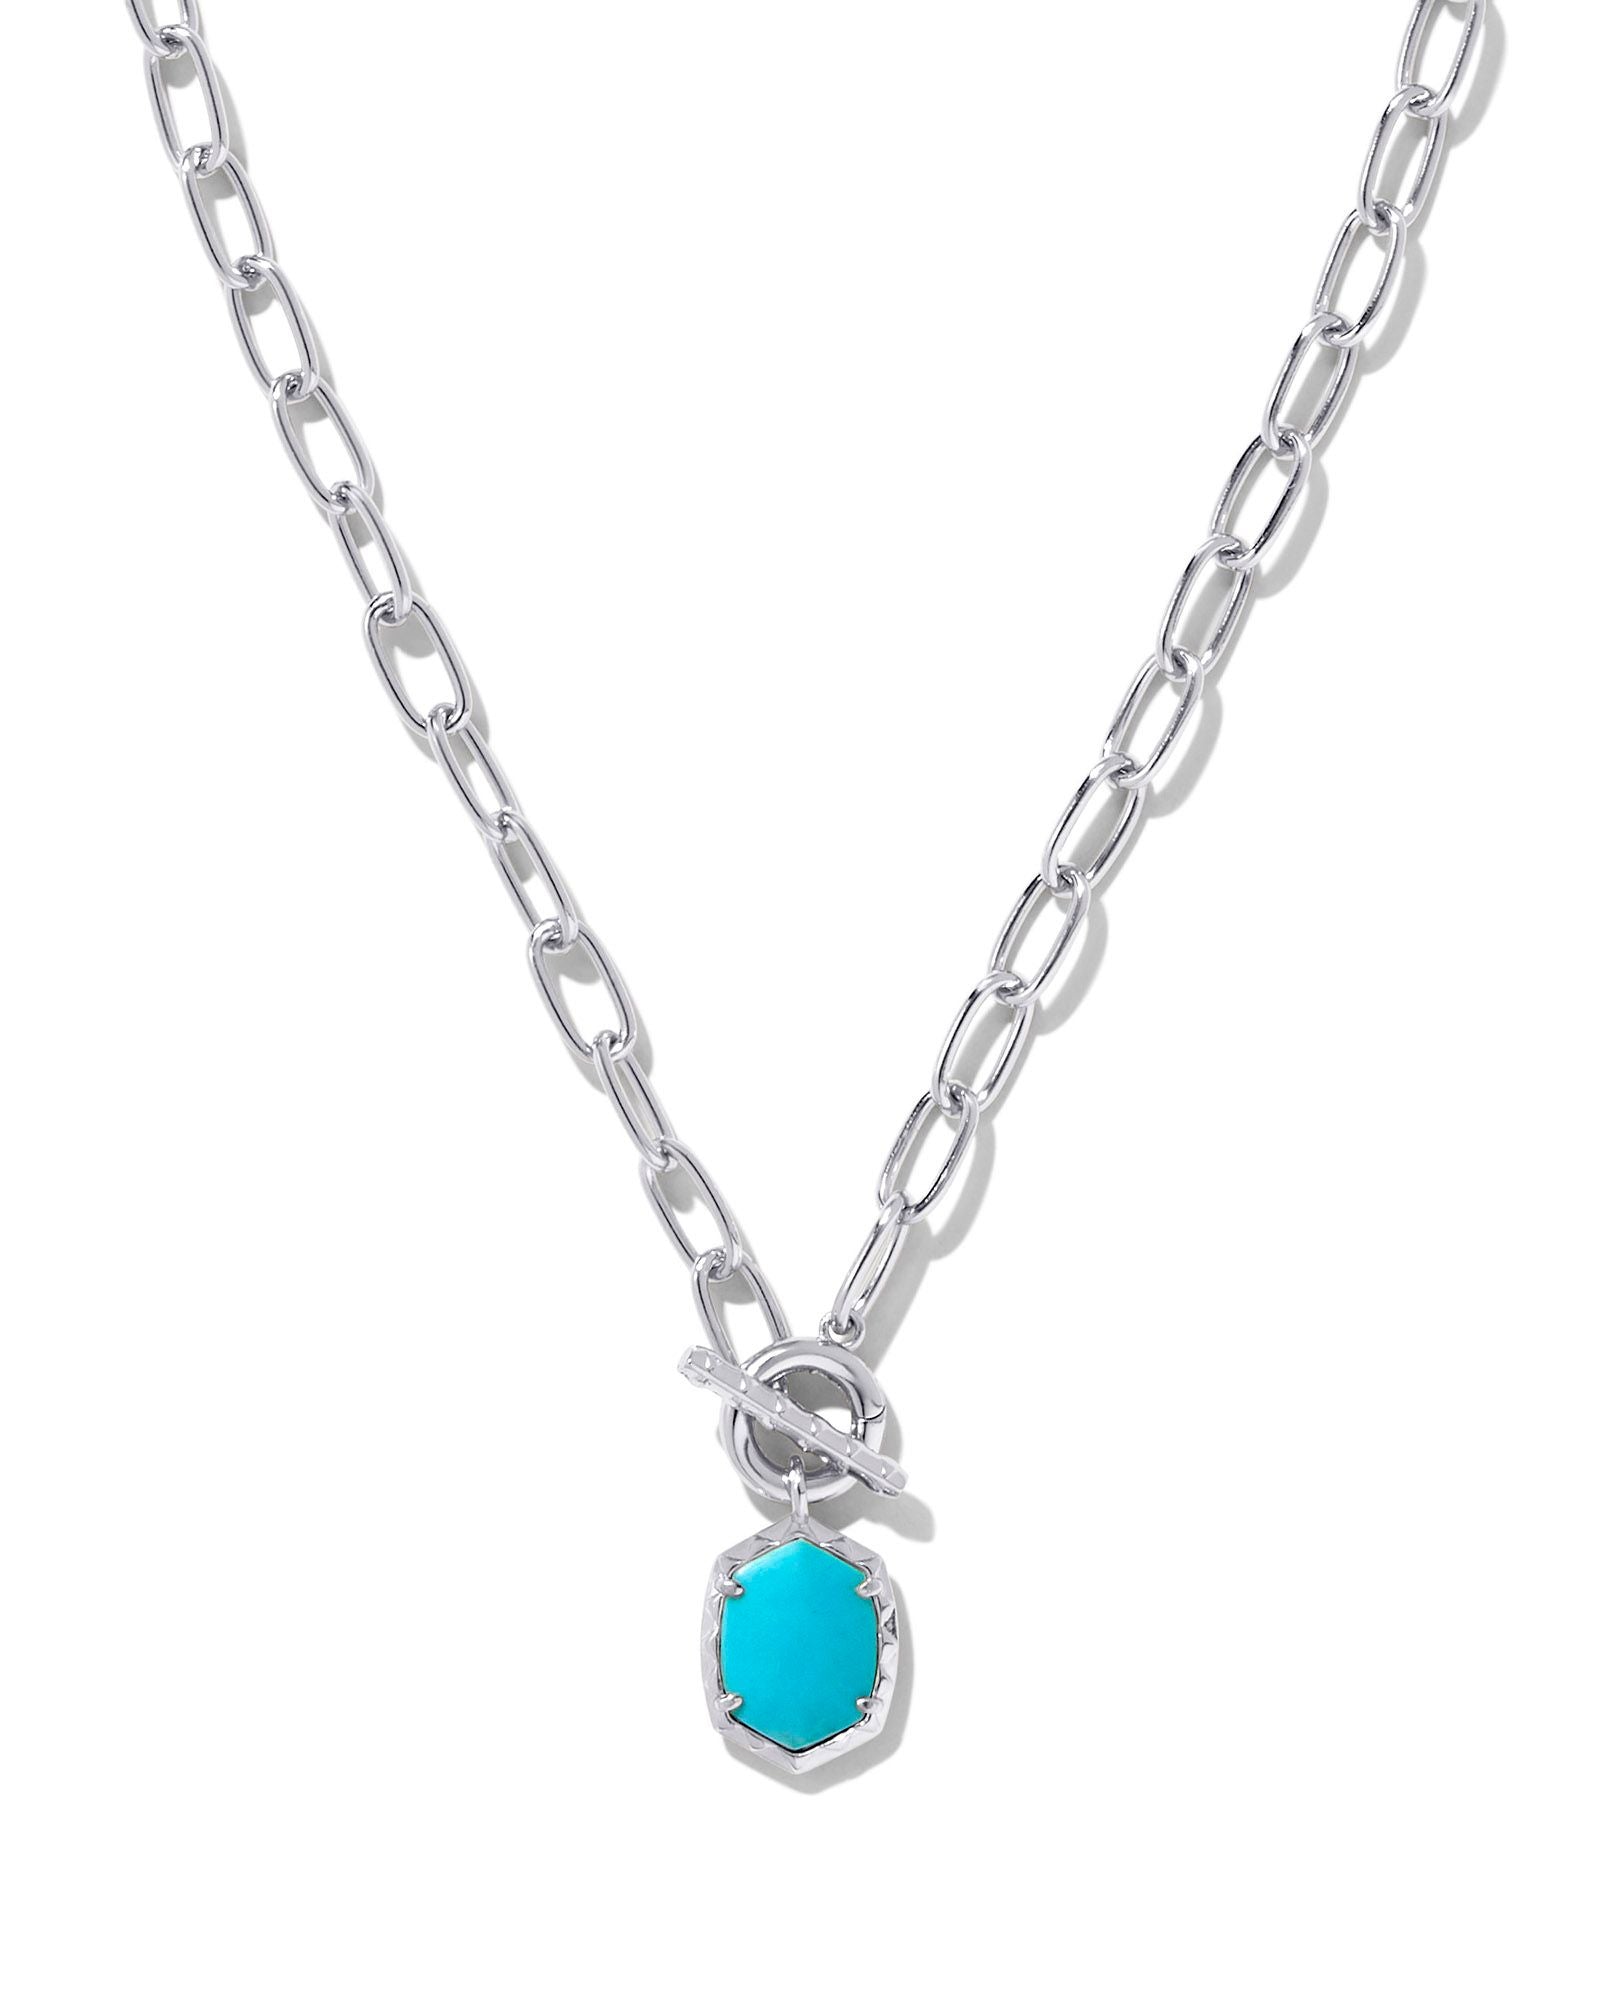 Daphne Silver Link and Chain Necklace in Variegated Turquoise Magnesite